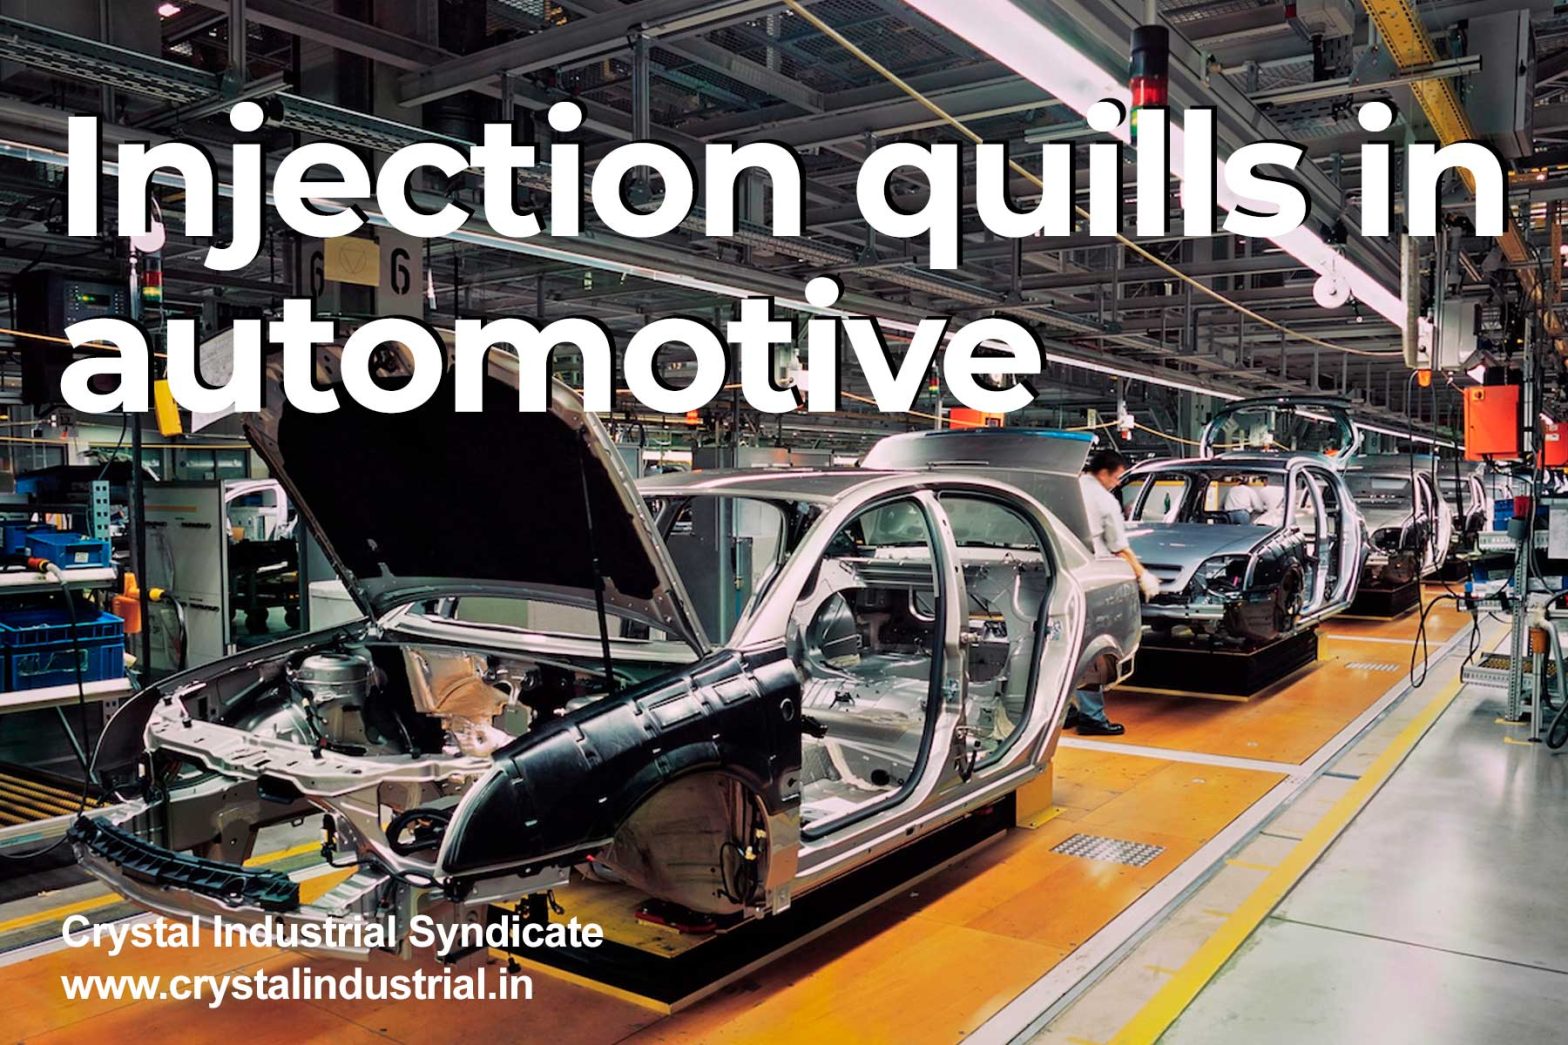 Injection quills in automotive industry